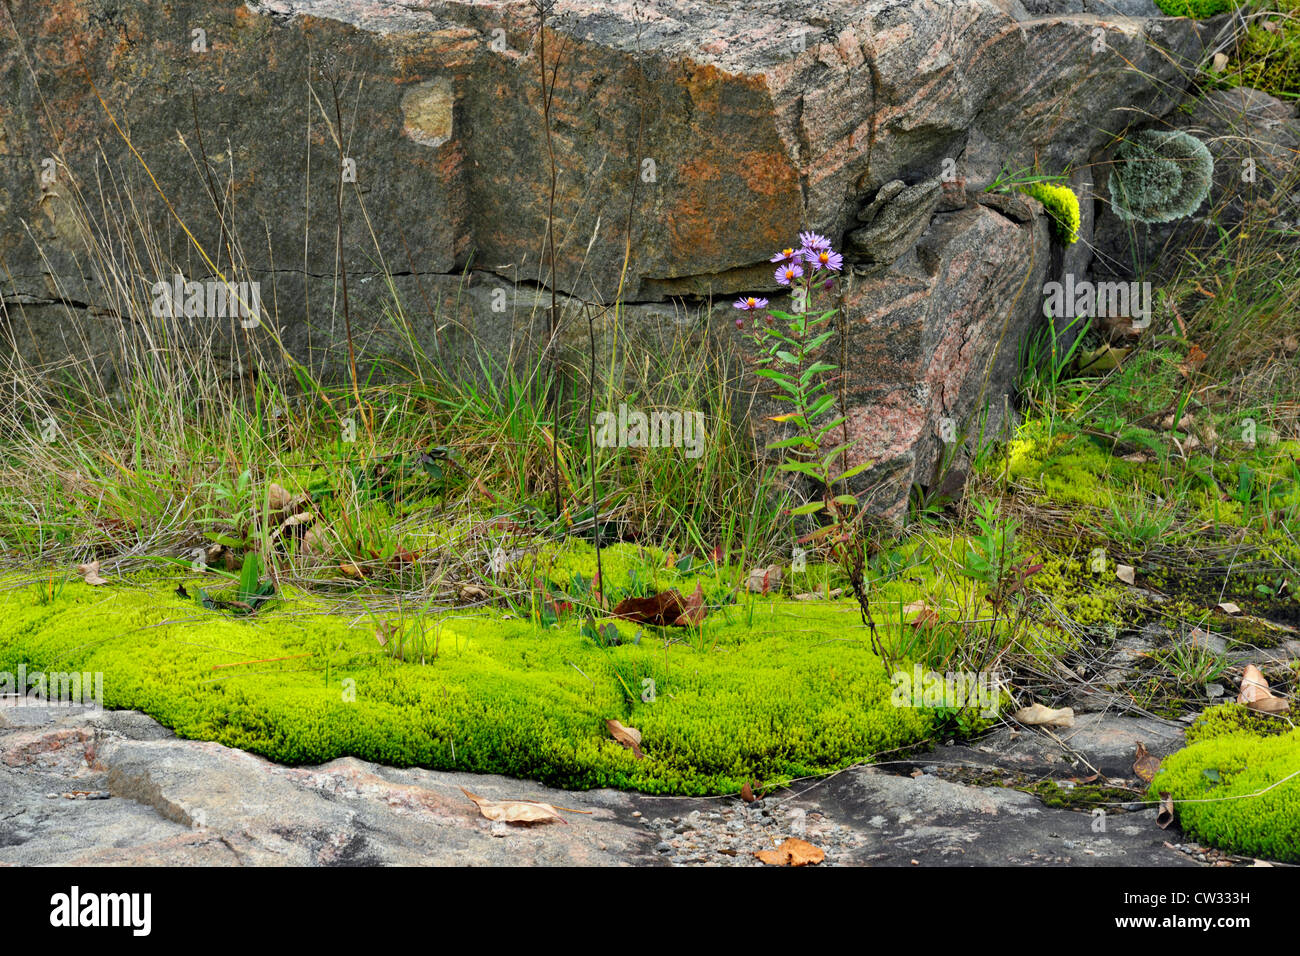 Pohlia moss colonies on granite outcrops with aster and grasses, Rosseau, Ontario, Canada Stock Photo